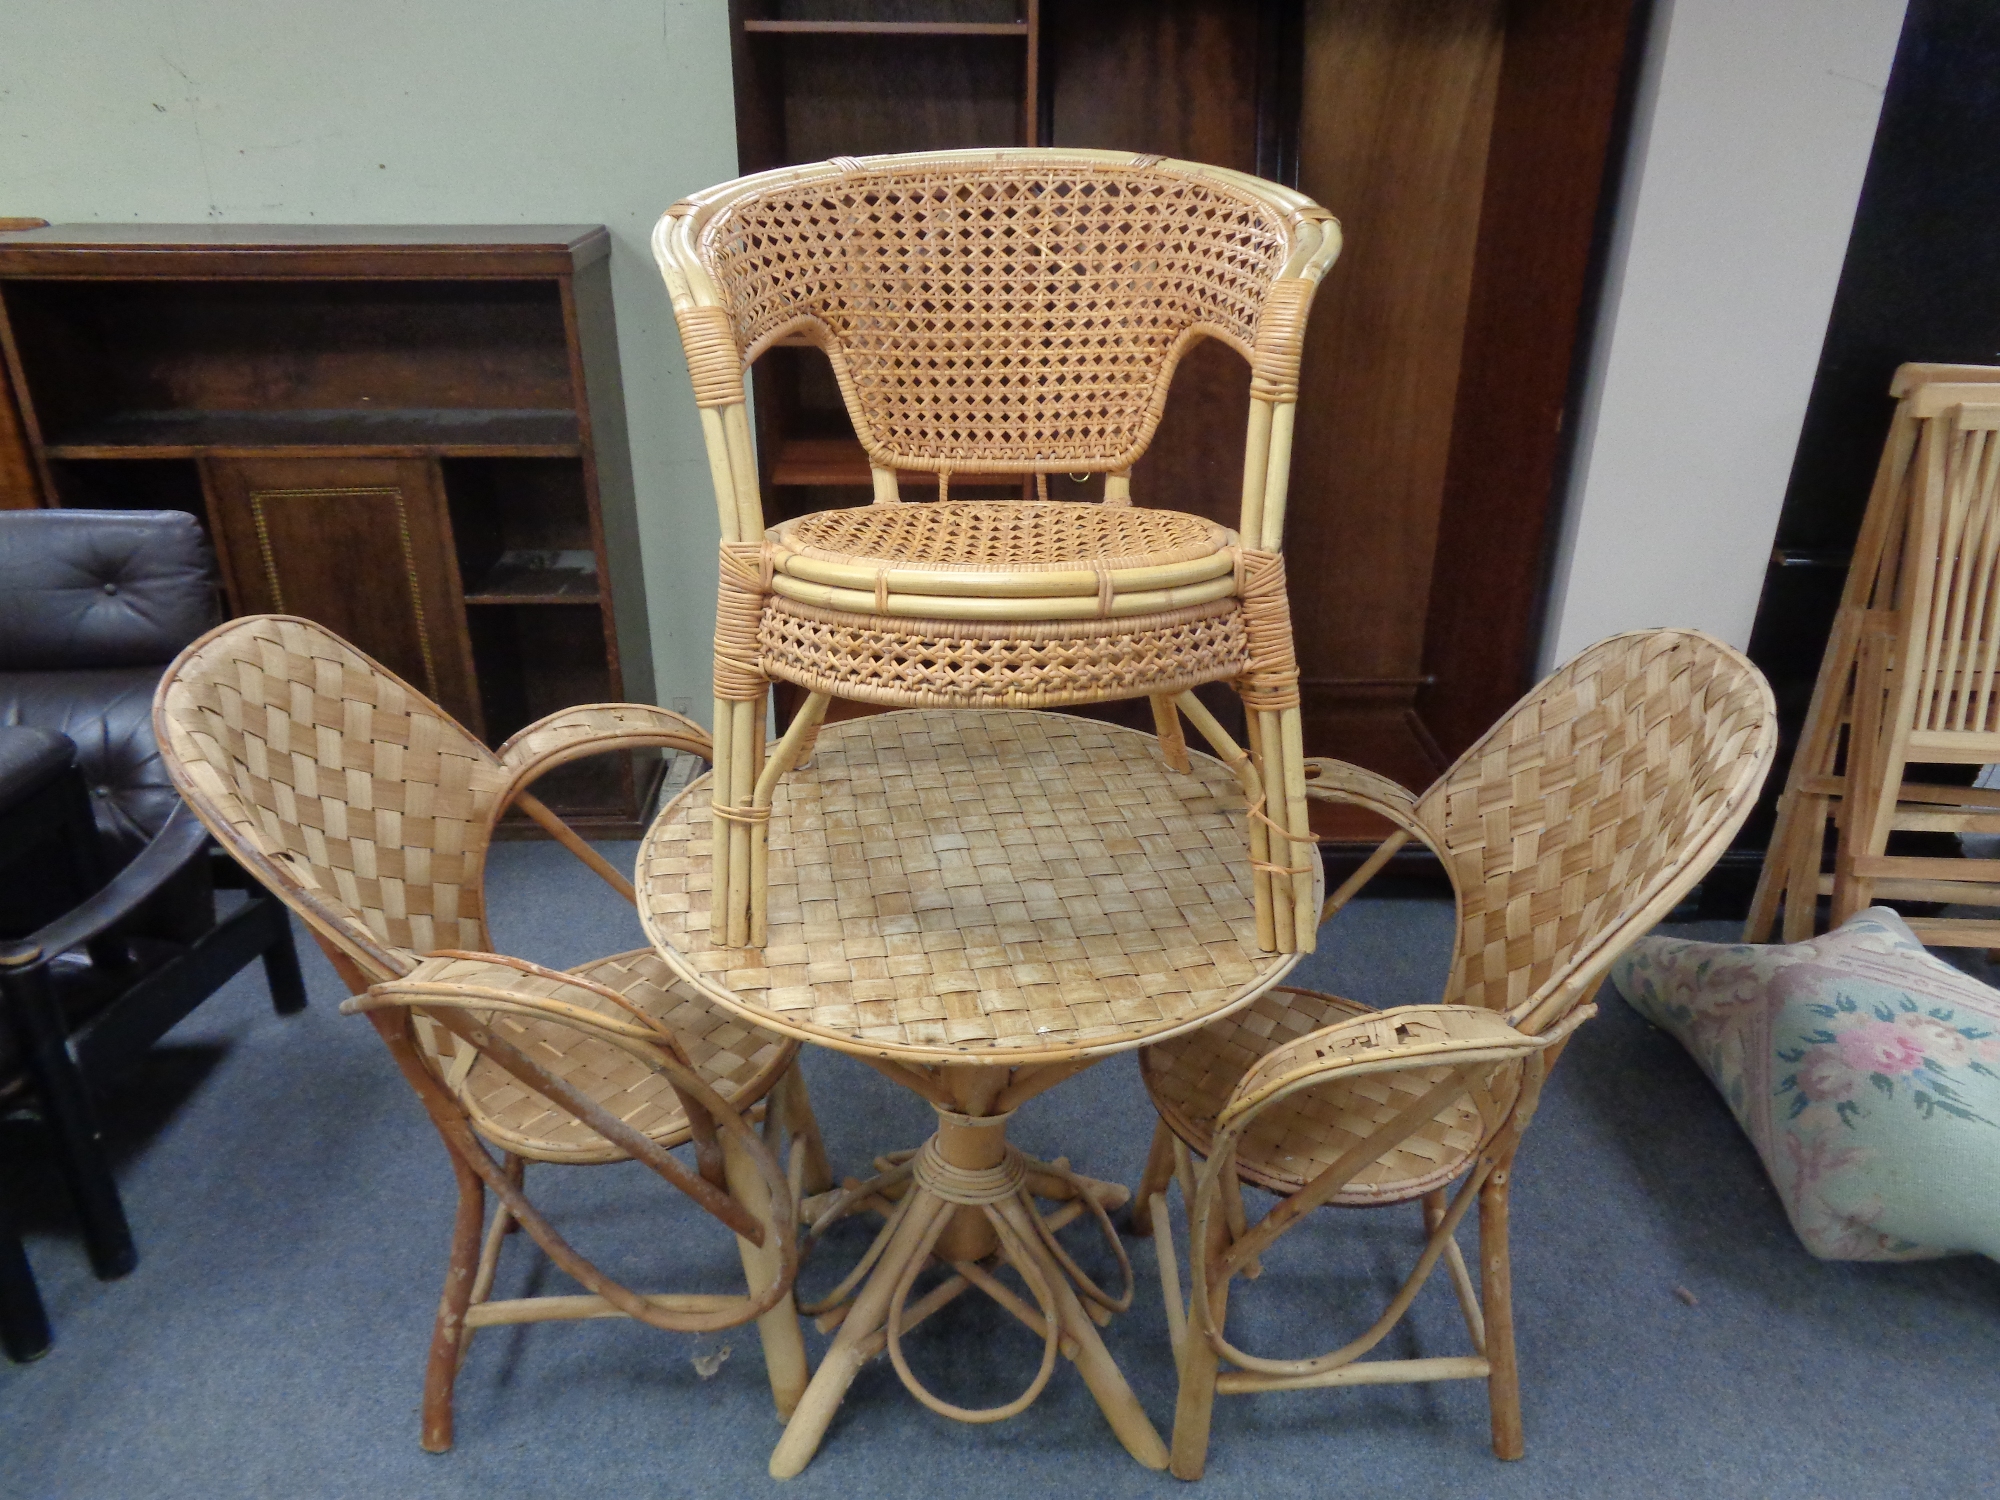 A wicker conservatory table and three similar chairs